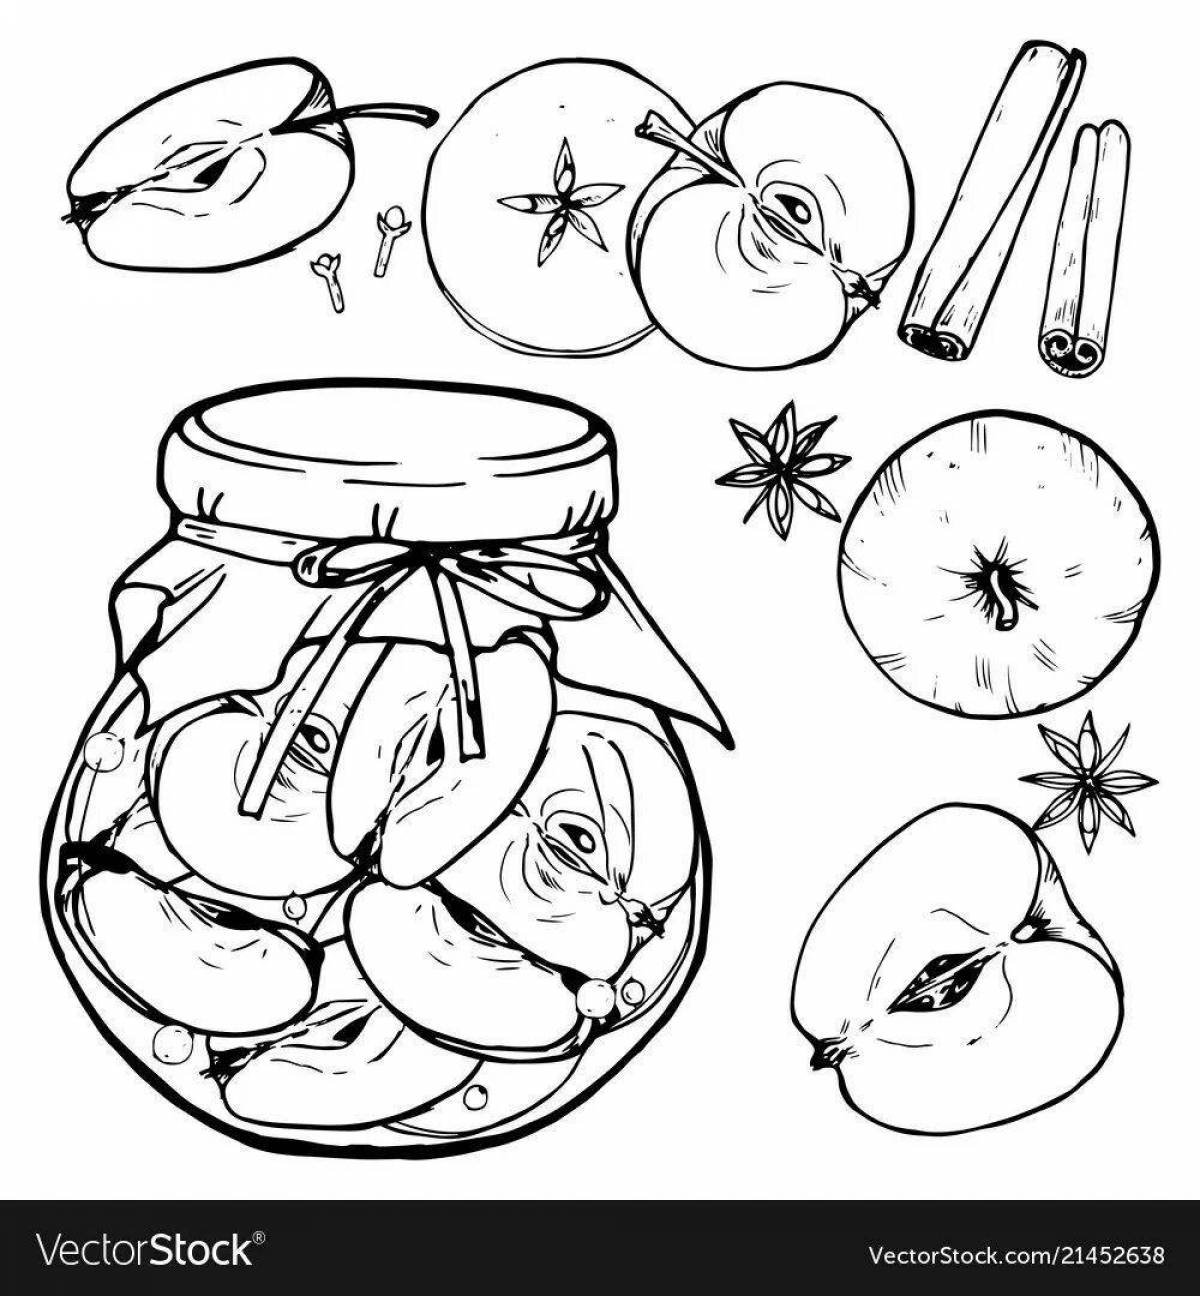 Sparkling compote coloring book for kids